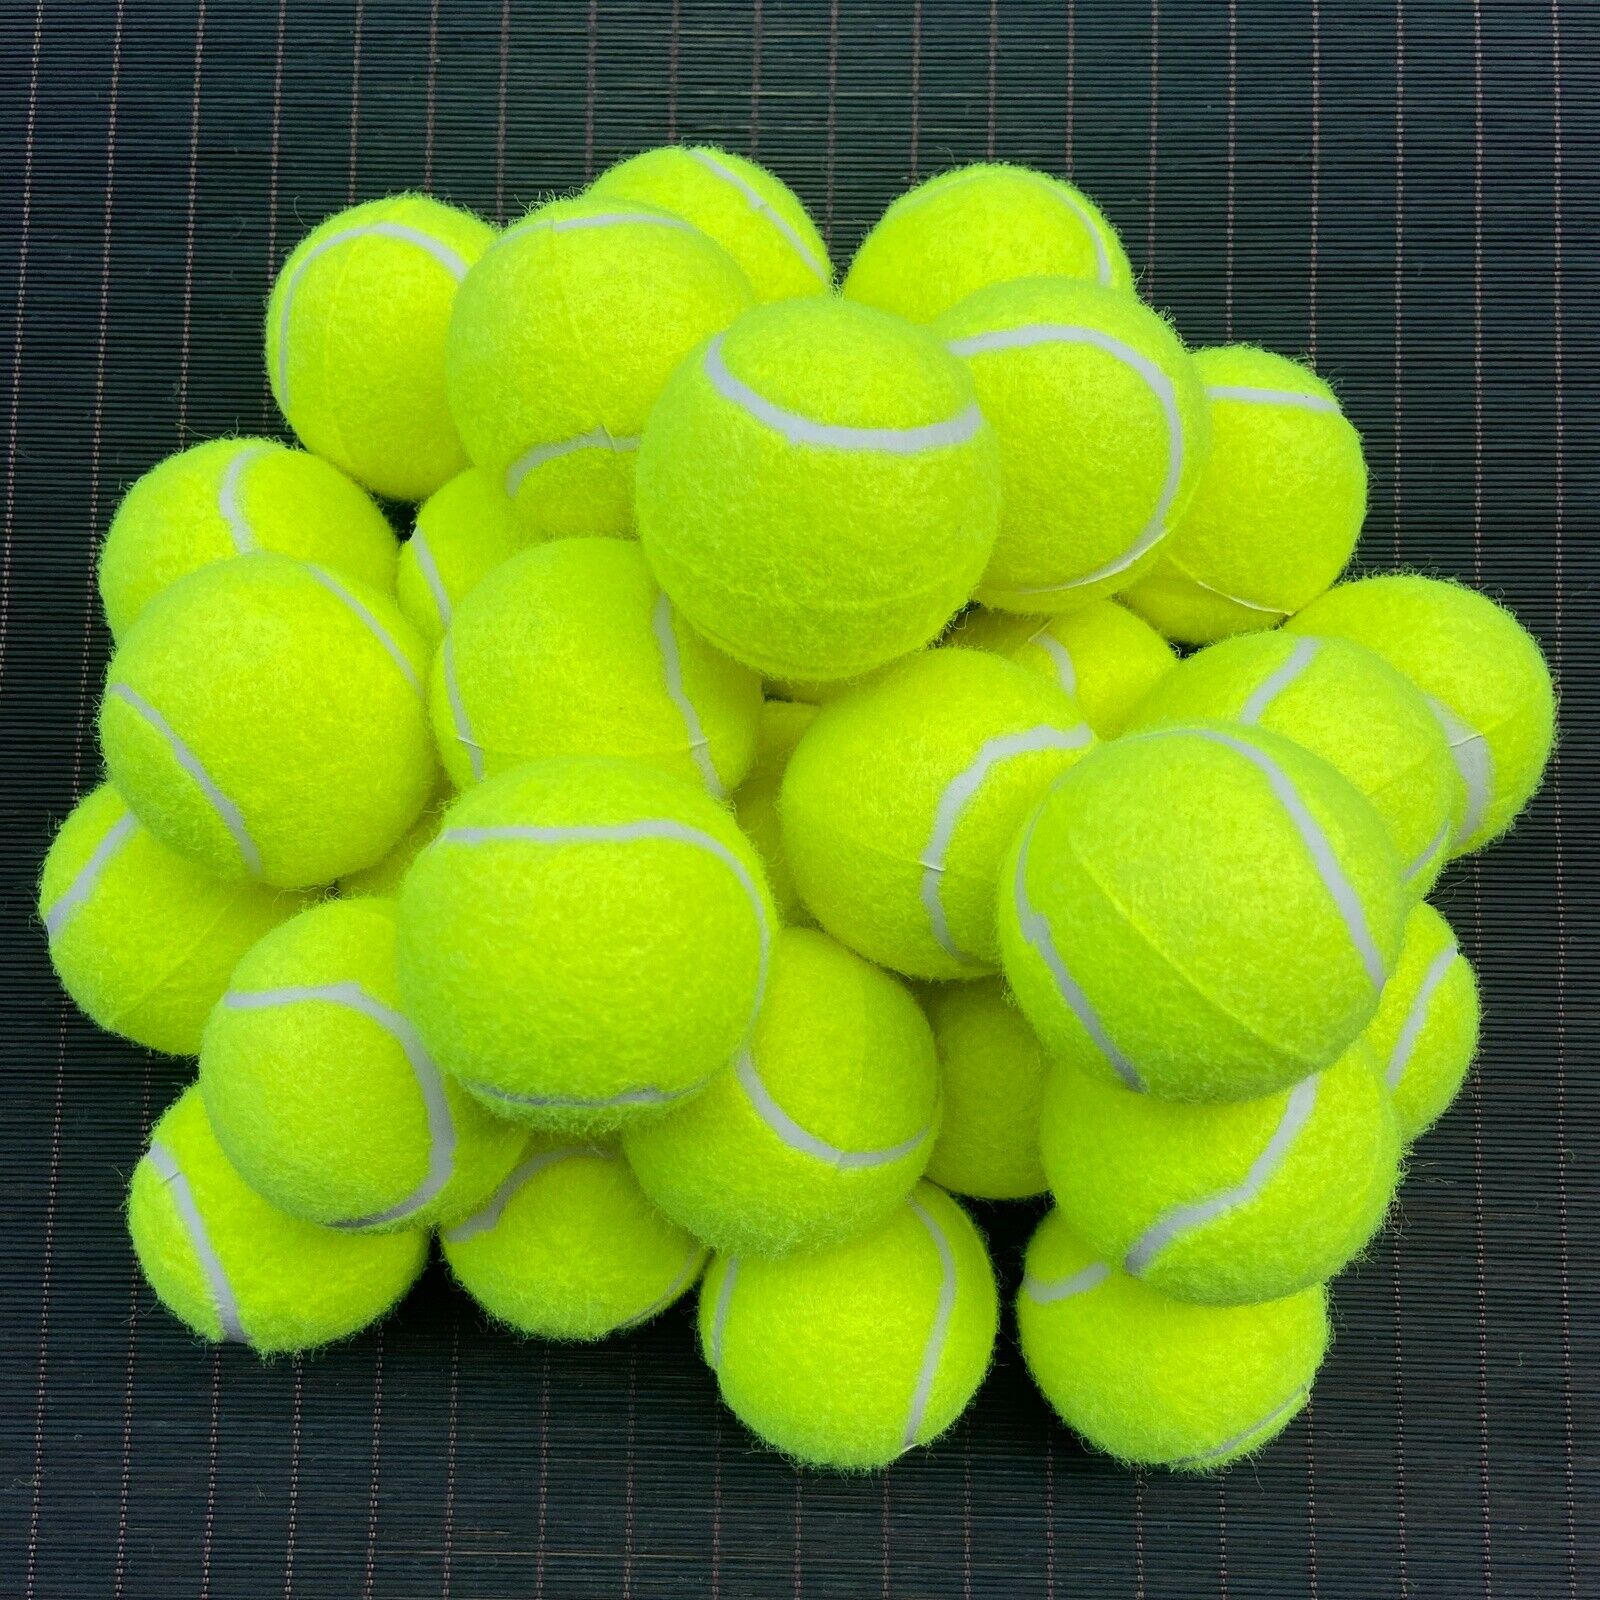 2.5inch Pet Dogs Fun Toys Tennis Balls Chew Throw Training rubber Washable